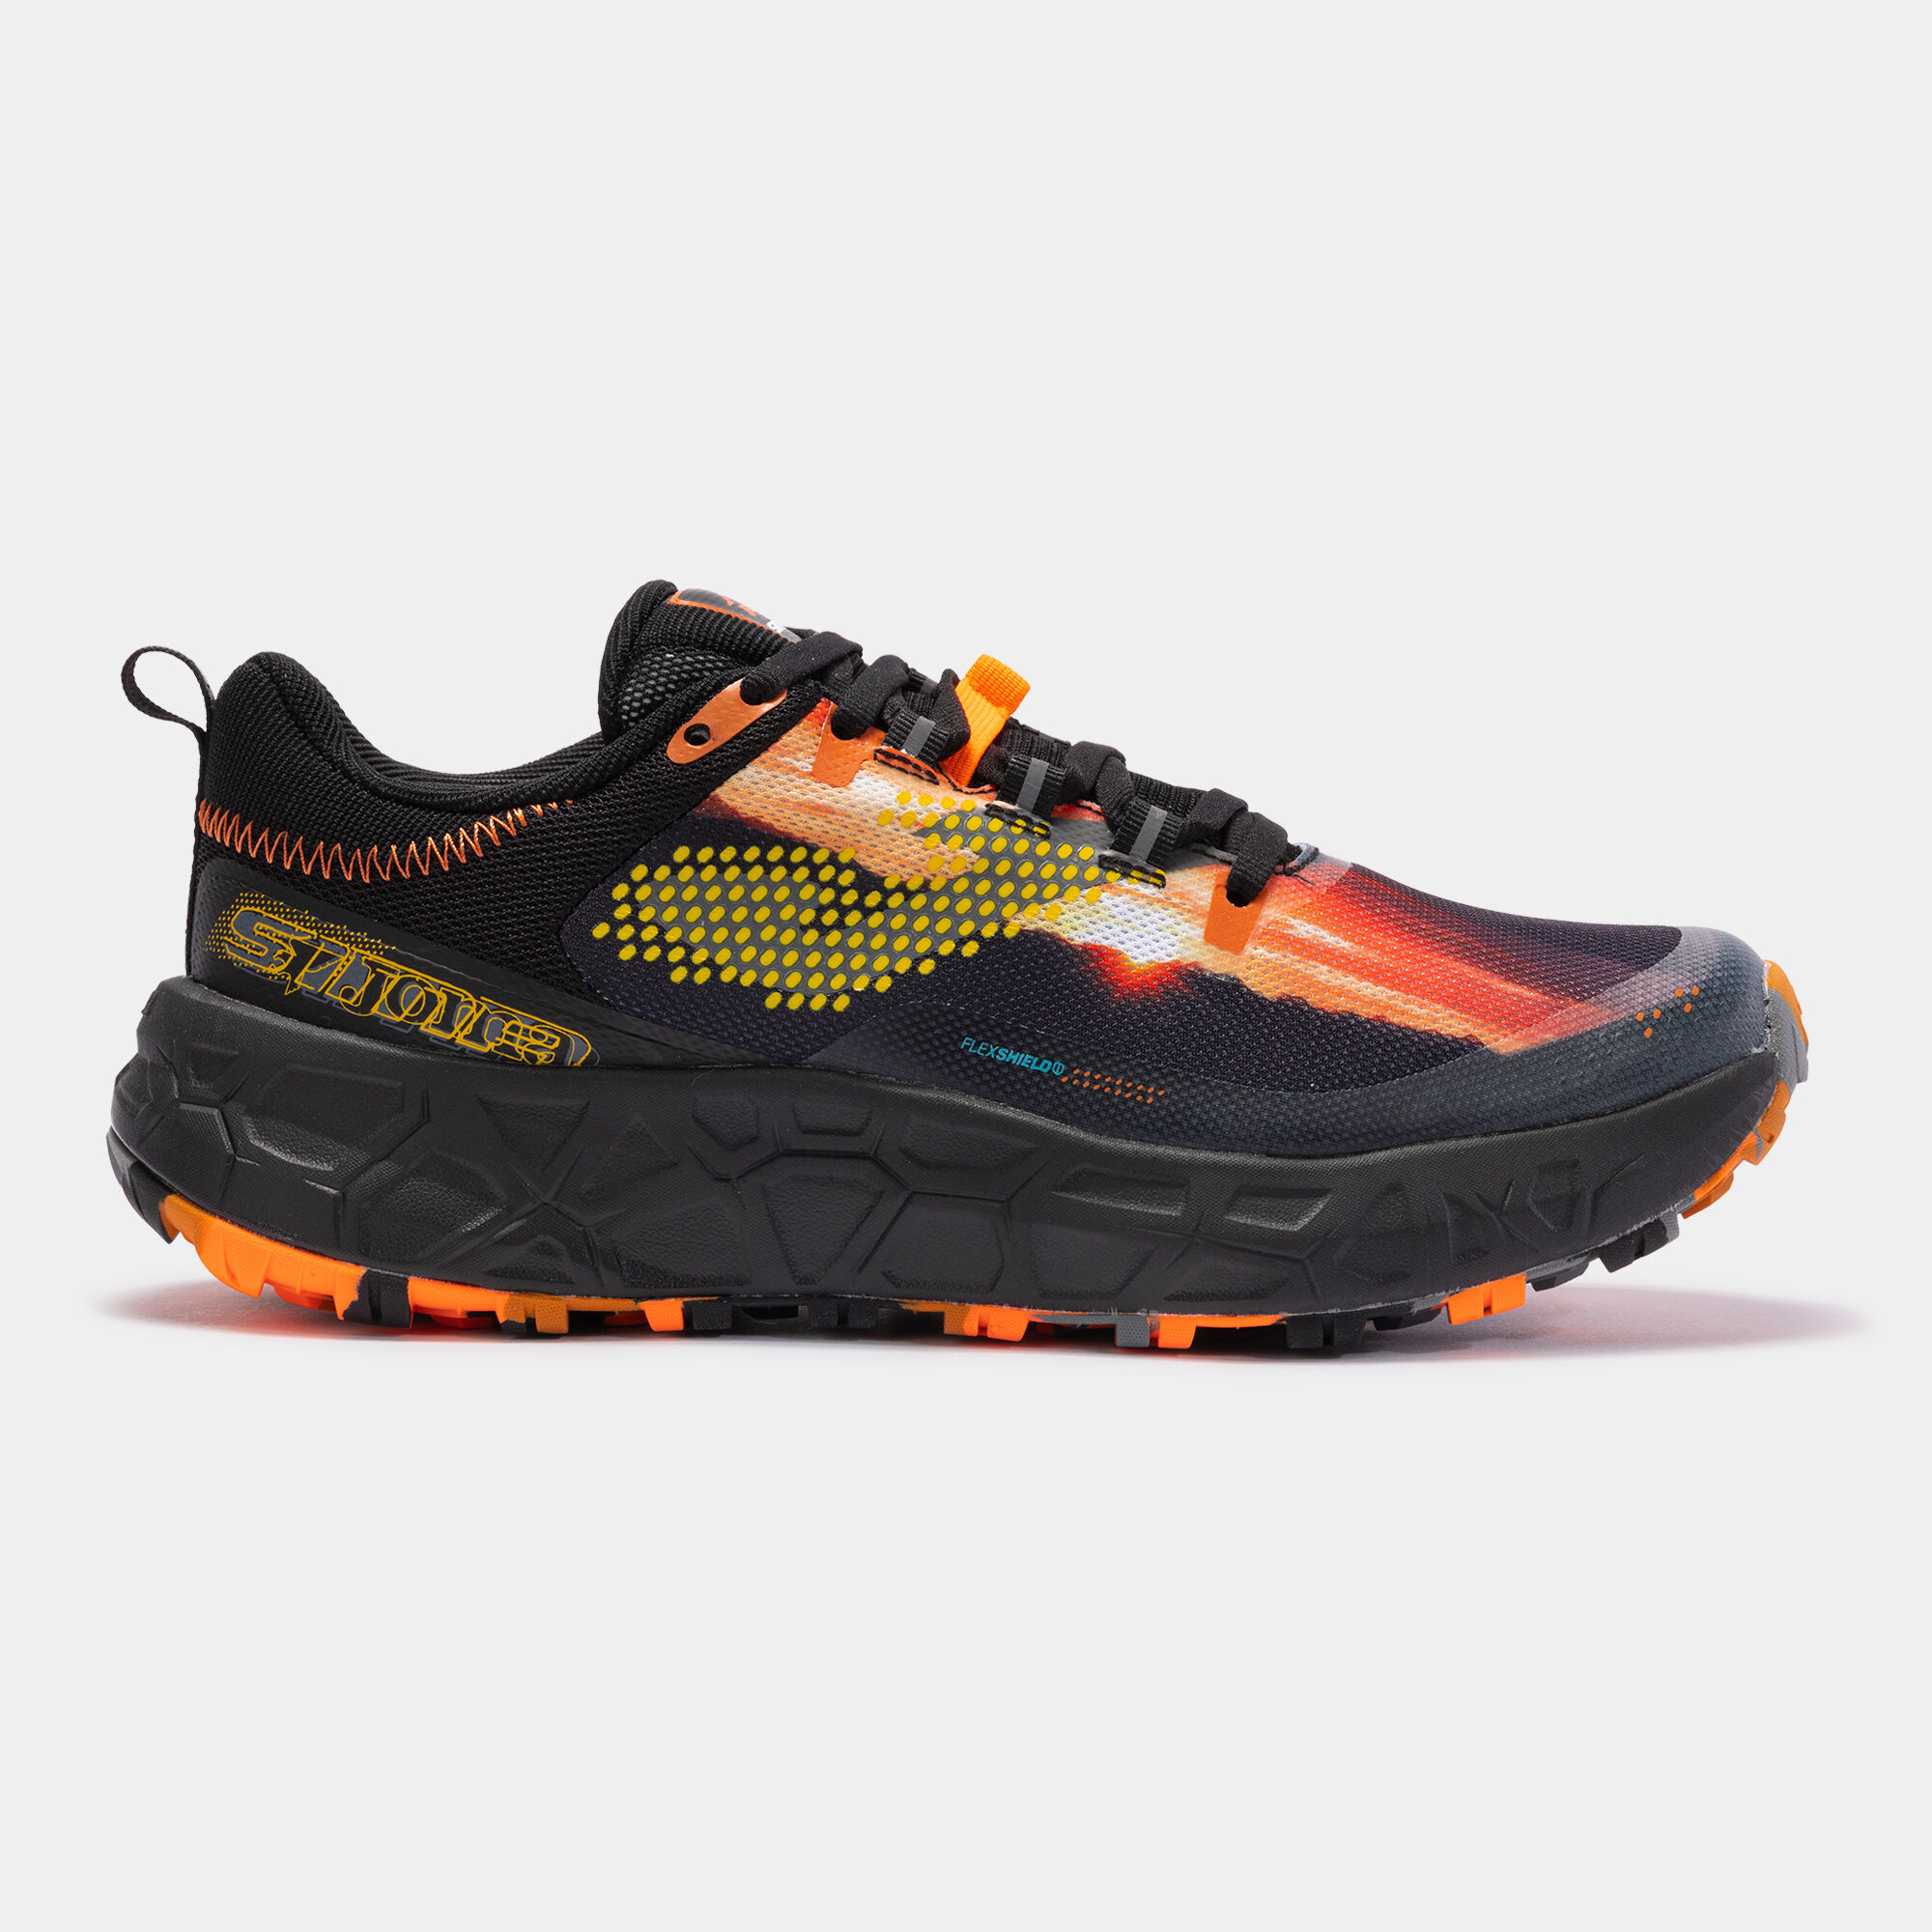 CHAUSSURES TRAIL RUNNING SIMA 22 HOMME MULTICOLORE